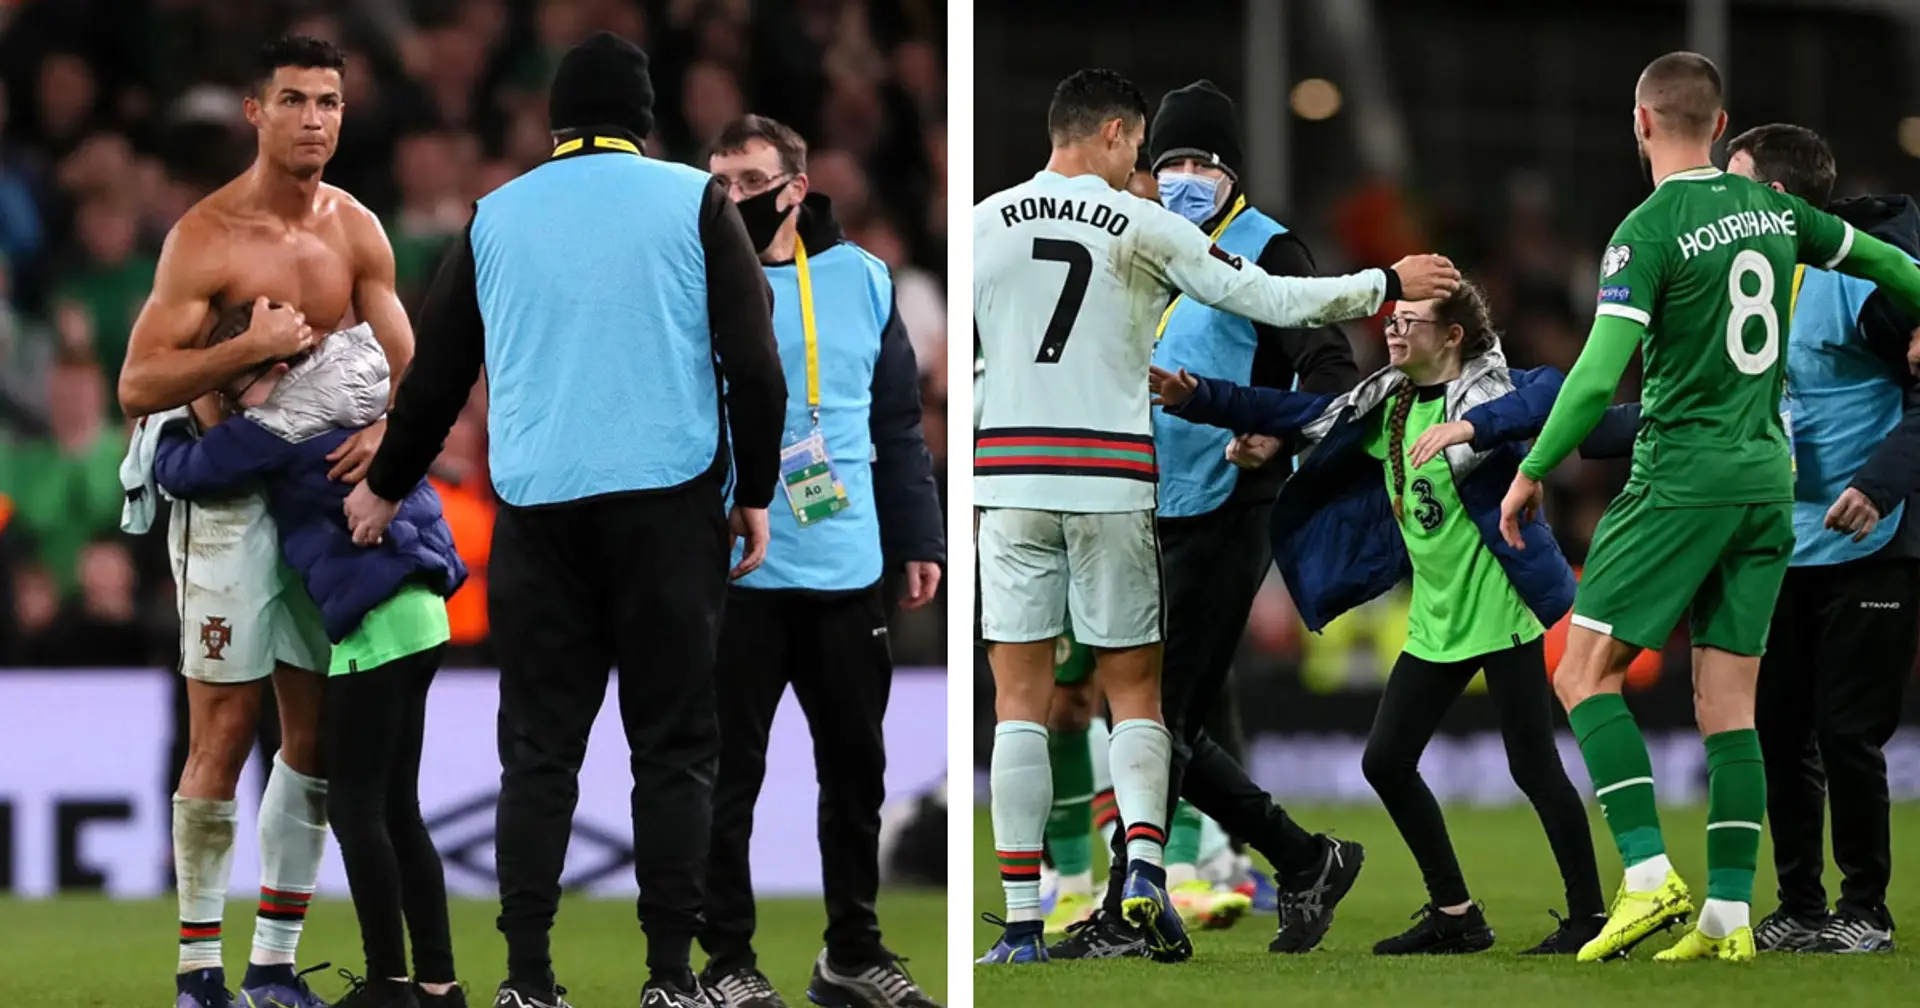 Ronaldo gives his shirt to young pitch invader after Ireland clash